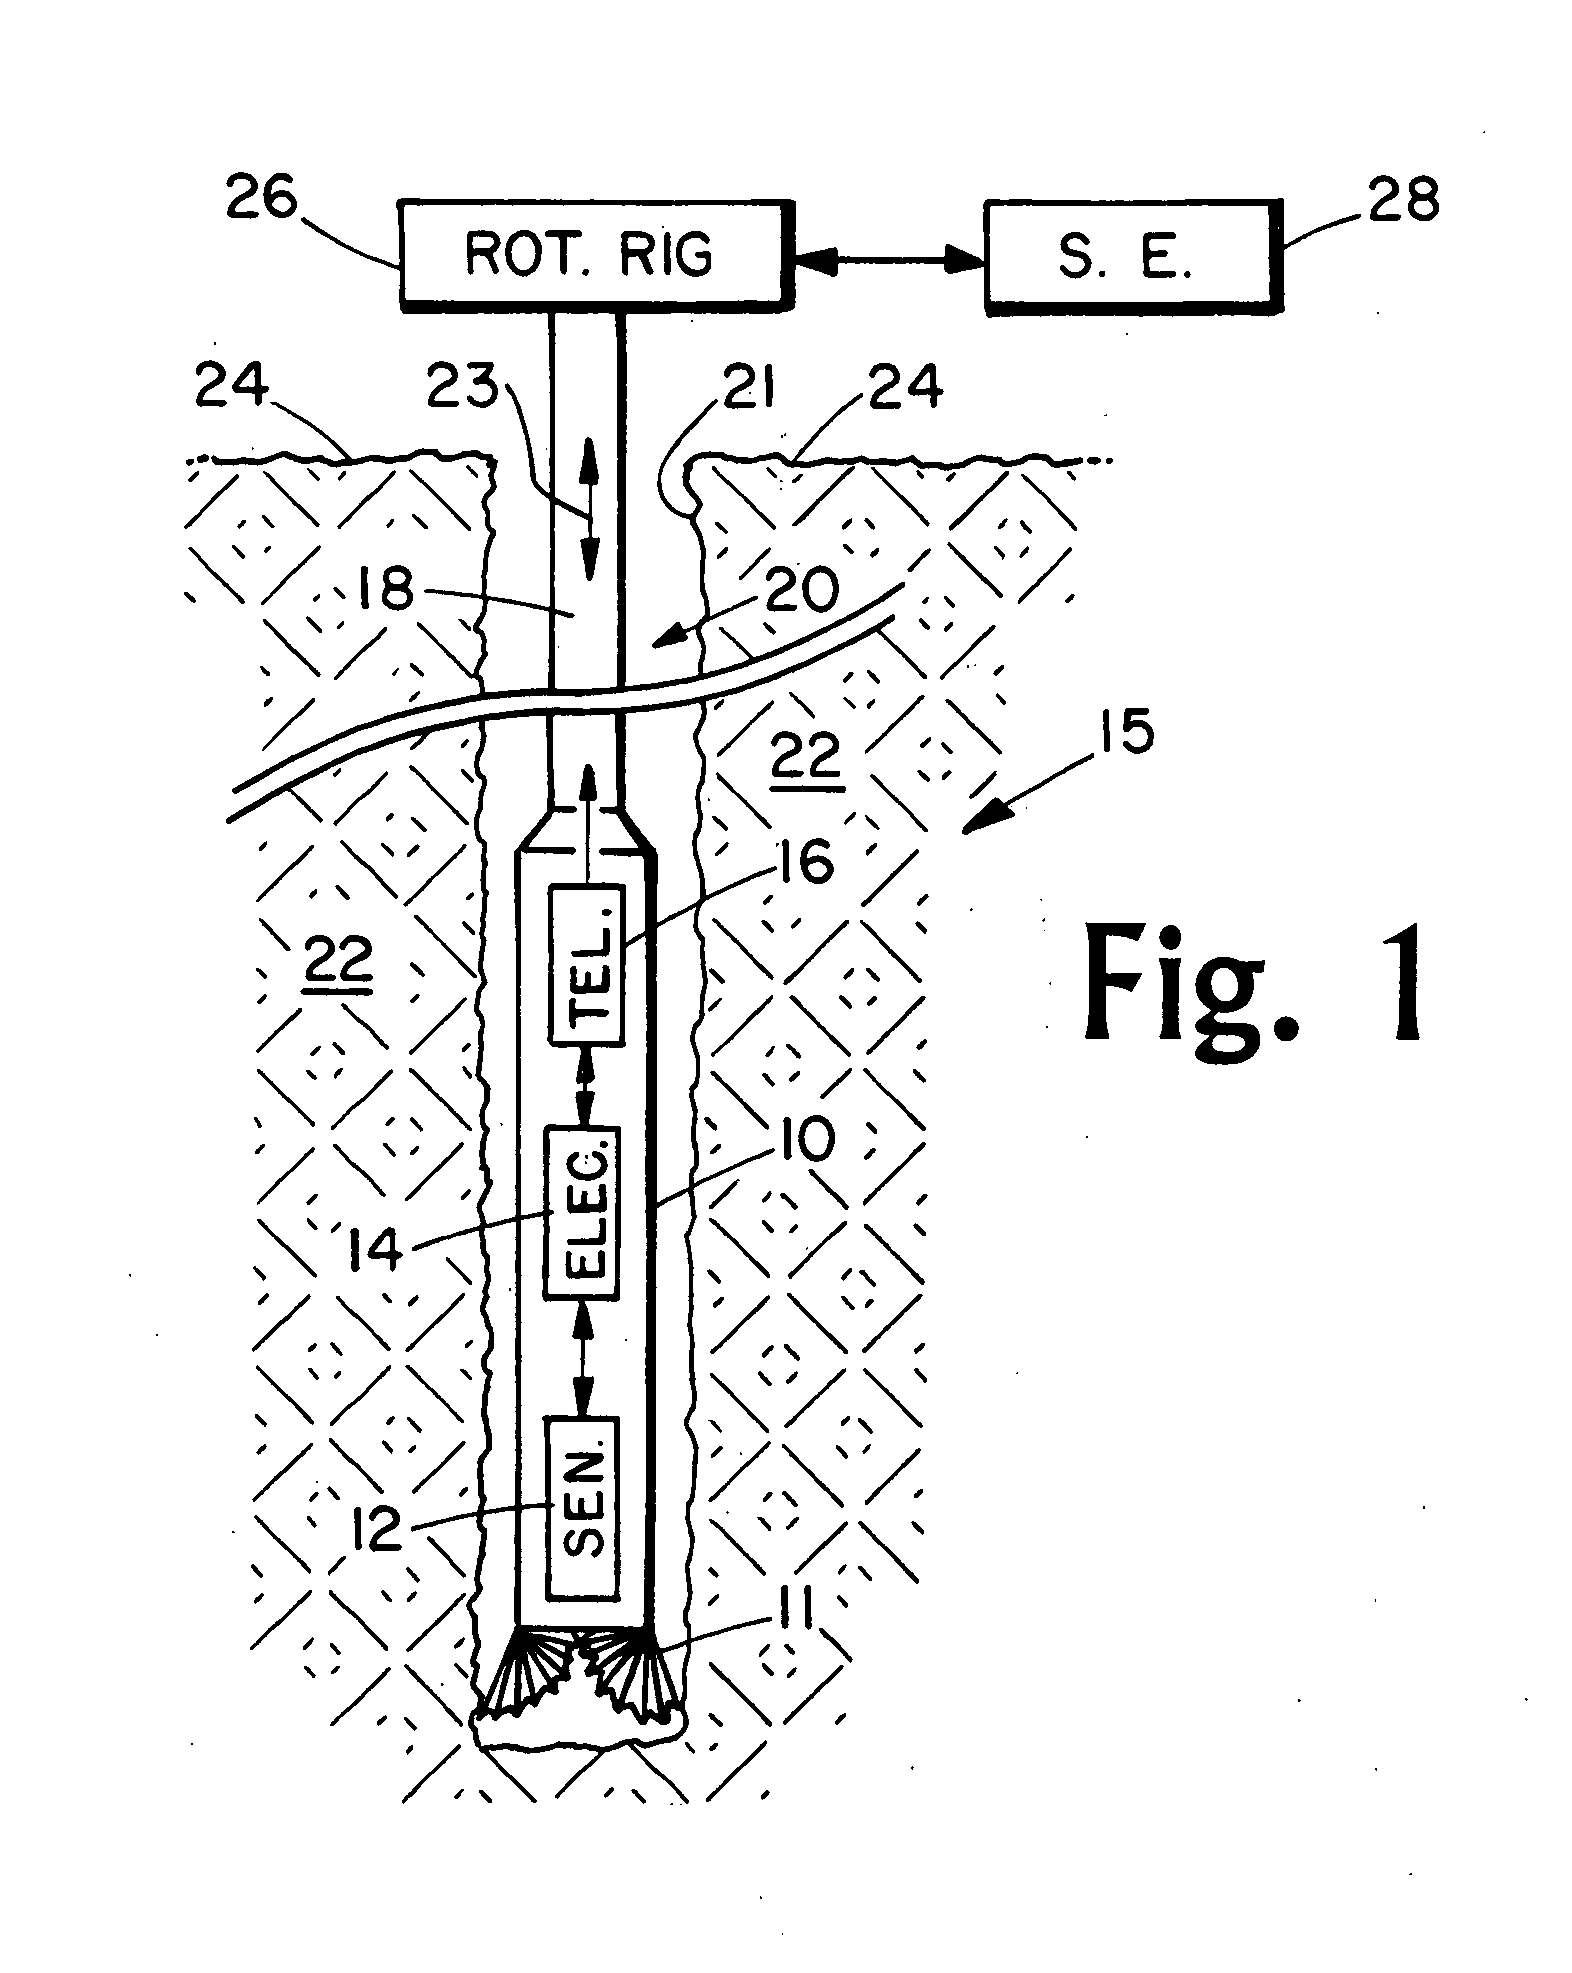 Gain stabilization apparatus and methods for spectraal gamma ray measurement systems